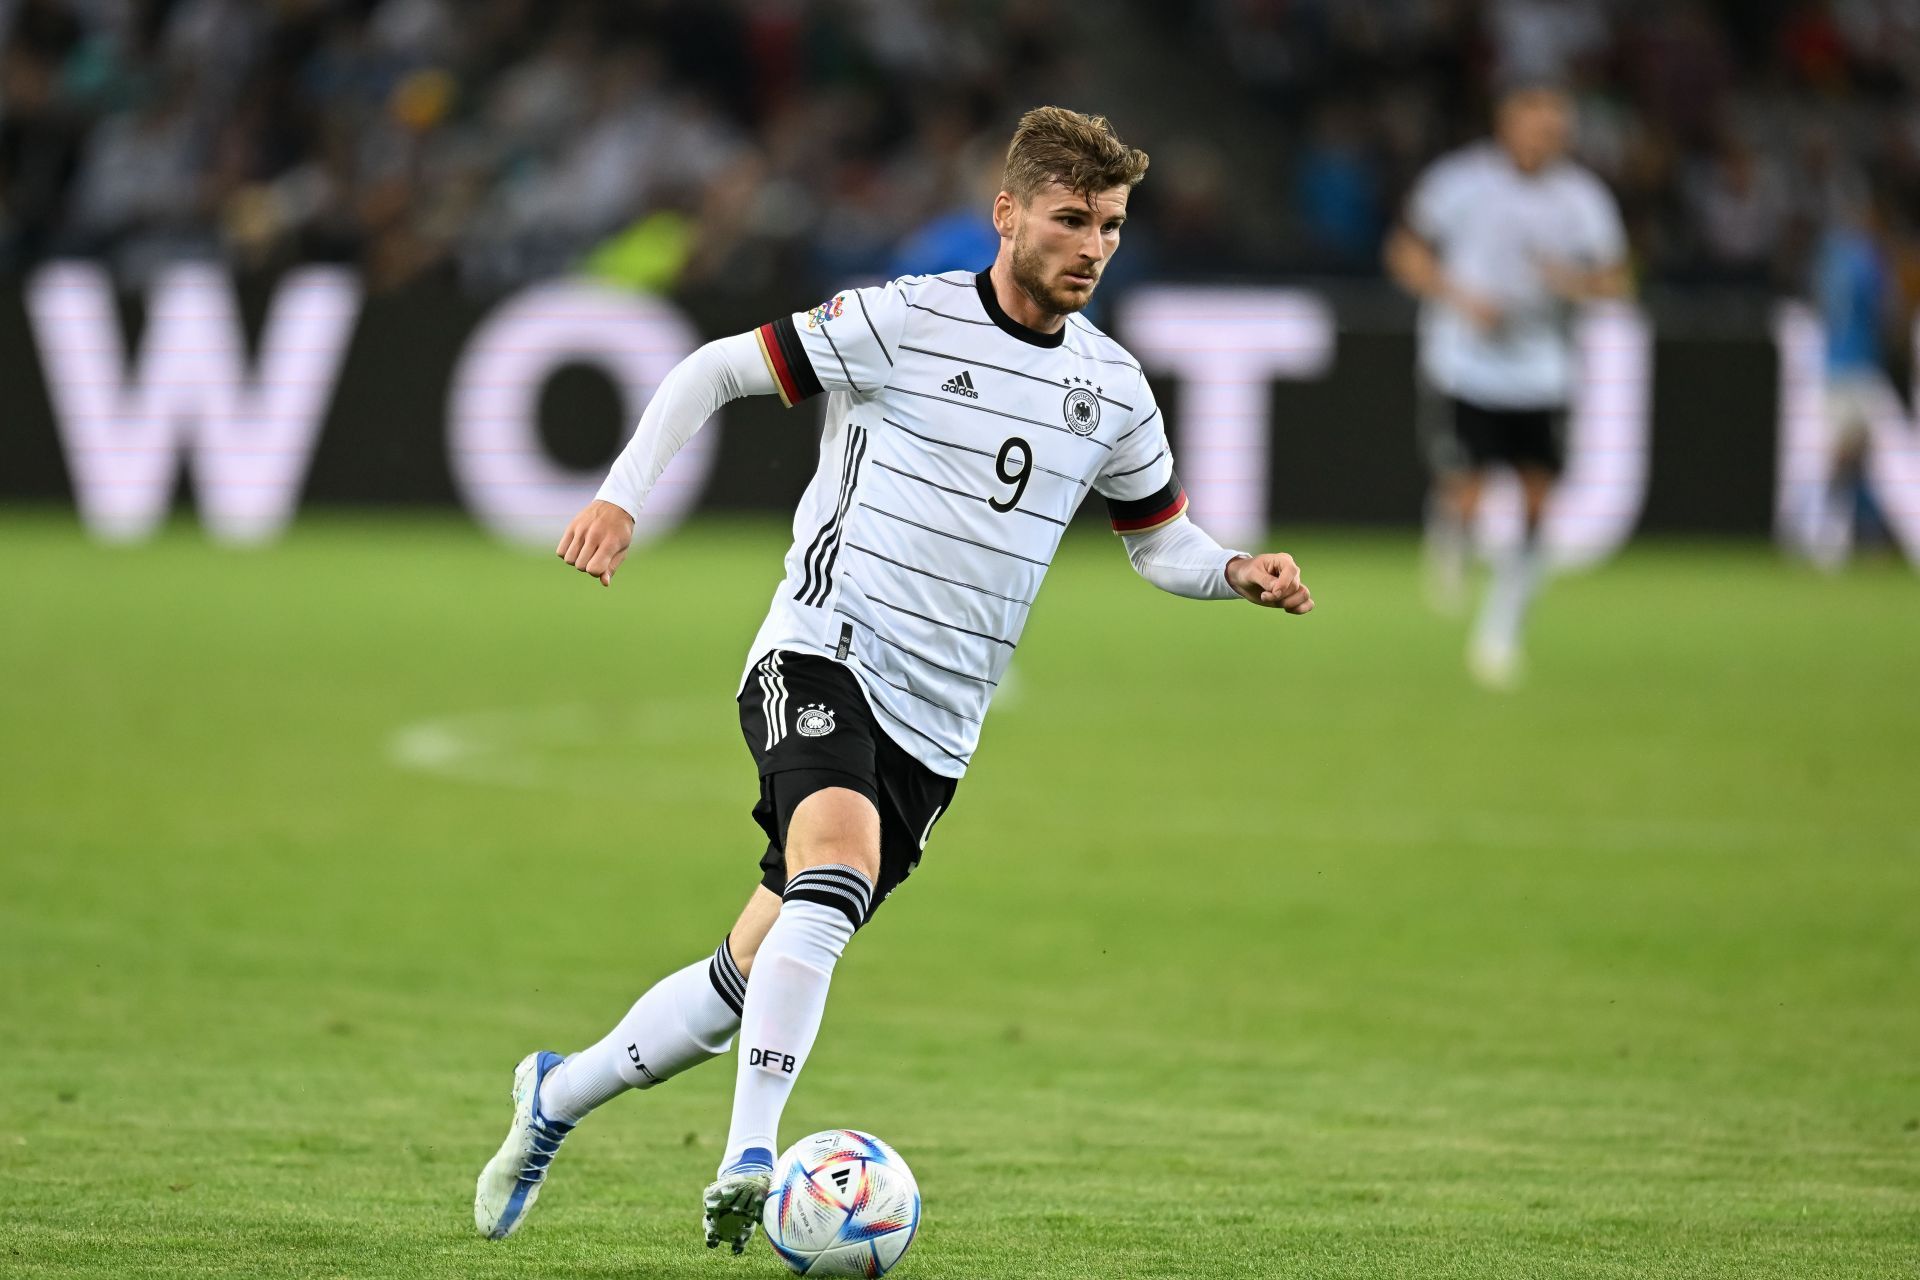 Timo Werner has admirers at Borussia Dortmund.